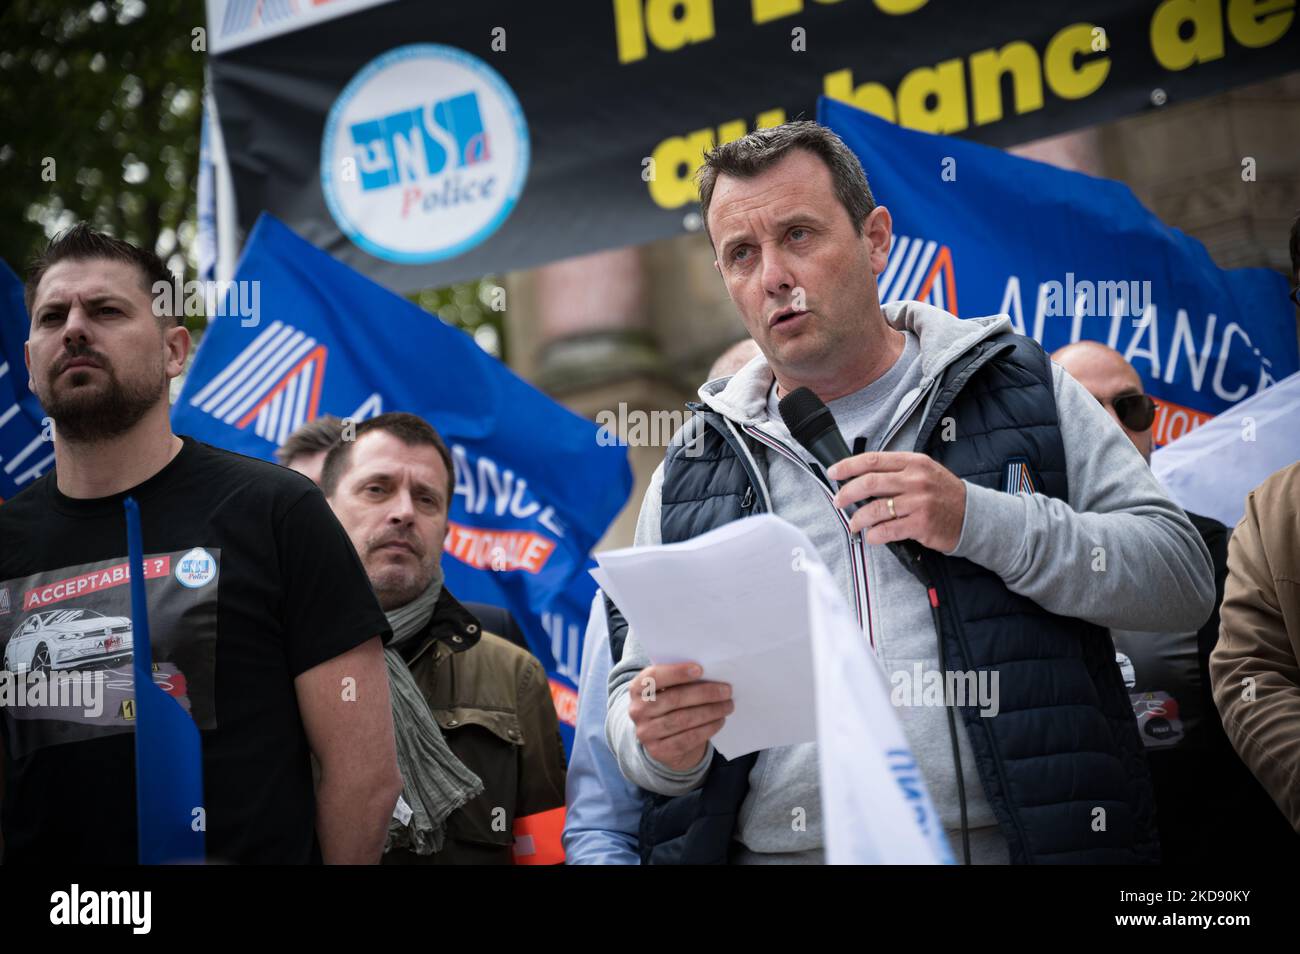 Fabien Vanhemelryck, secretary general of the Alliance Police Nationale union, speaks at a police demonstration in Paris on May 2, 2022 to protest against the indictment for 'voluntary manslaughter' of the French police officer who killed two men who allegedly forced a checkpoint on the Pont-Neuf in Paris on April 24, 2022. The call for the rally was initiated by the Alliance Police Nationale union, which was joined by the Synergie officers' union and Unsa-Police. (Photo by Samuel Boivin/NurPhoto) Stock Photo